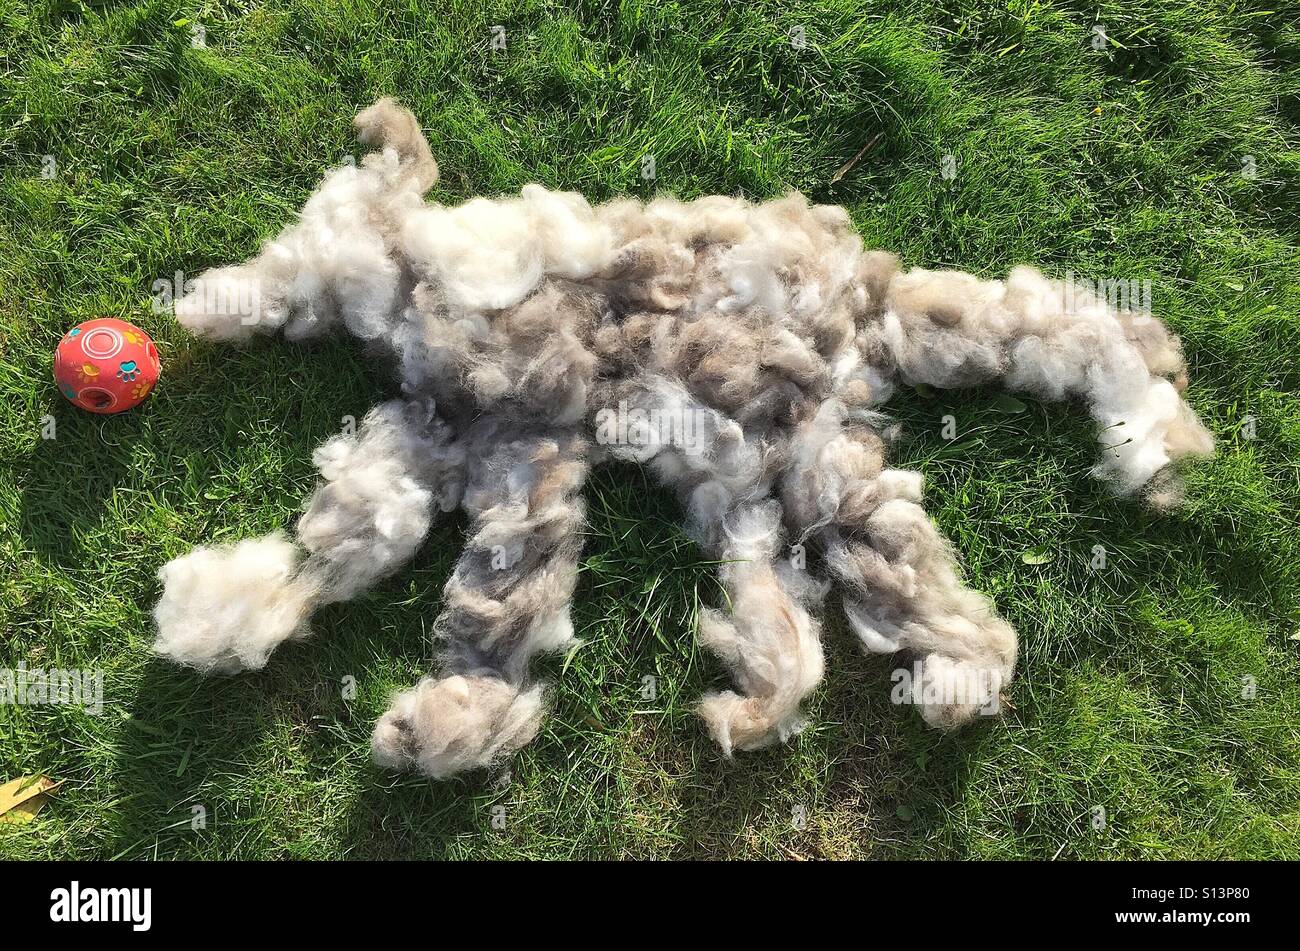 Fur from grooming a dog Stock Photo